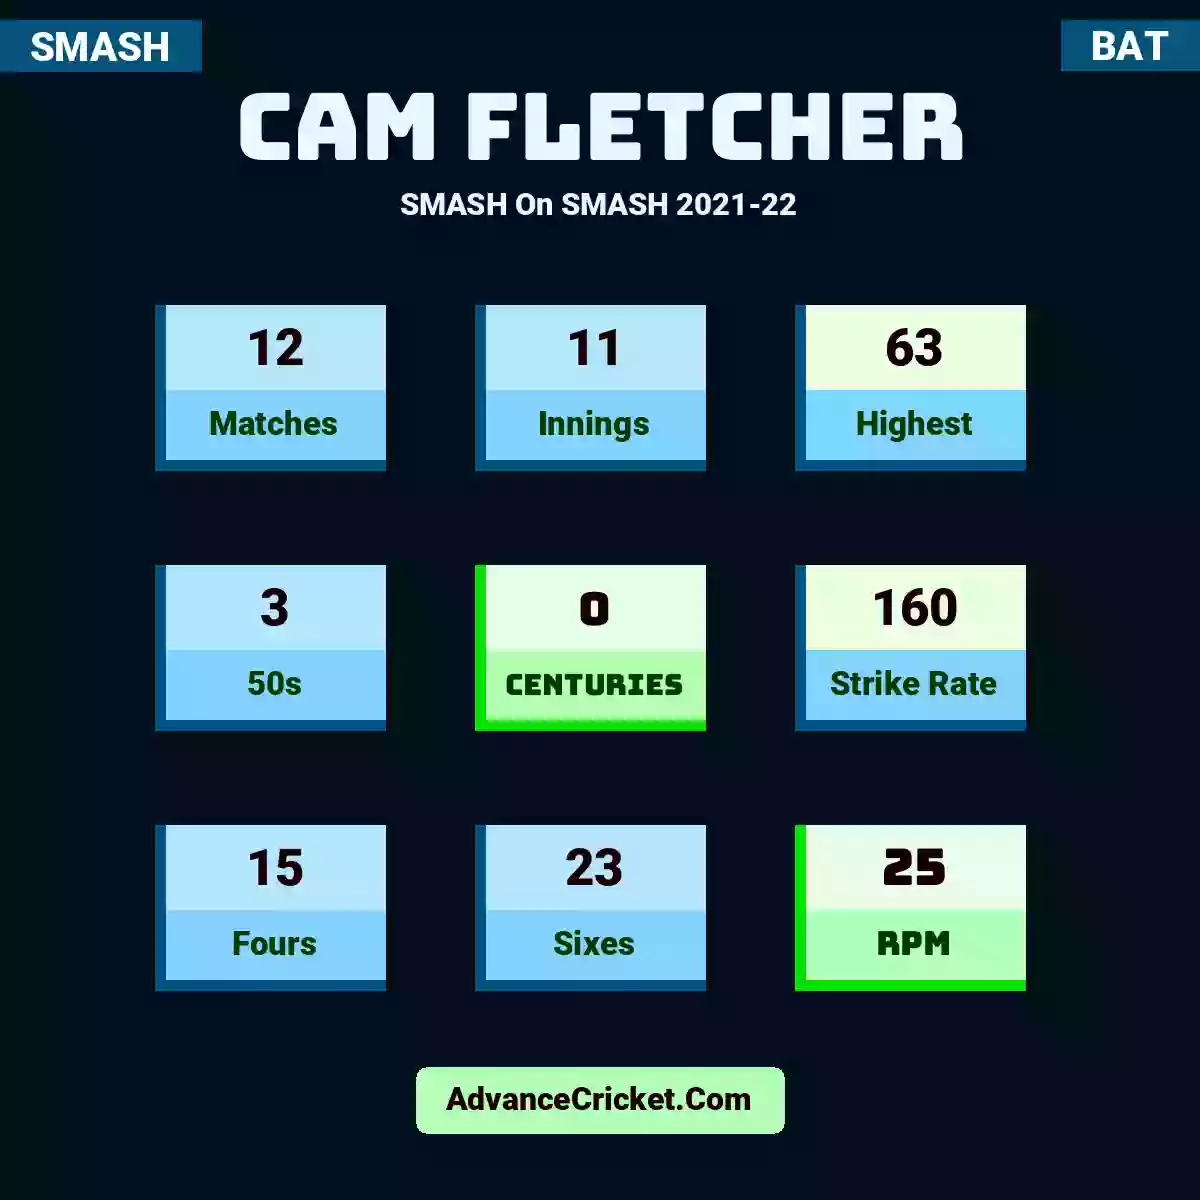 Cam Fletcher SMASH  On SMASH 2021-22, Cam Fletcher played 12 matches, scored 63 runs as highest, 3 half-centuries, and 0 centuries, with a strike rate of 160. C.Fletcher hit 15 fours and 23 sixes, with an RPM of 25.